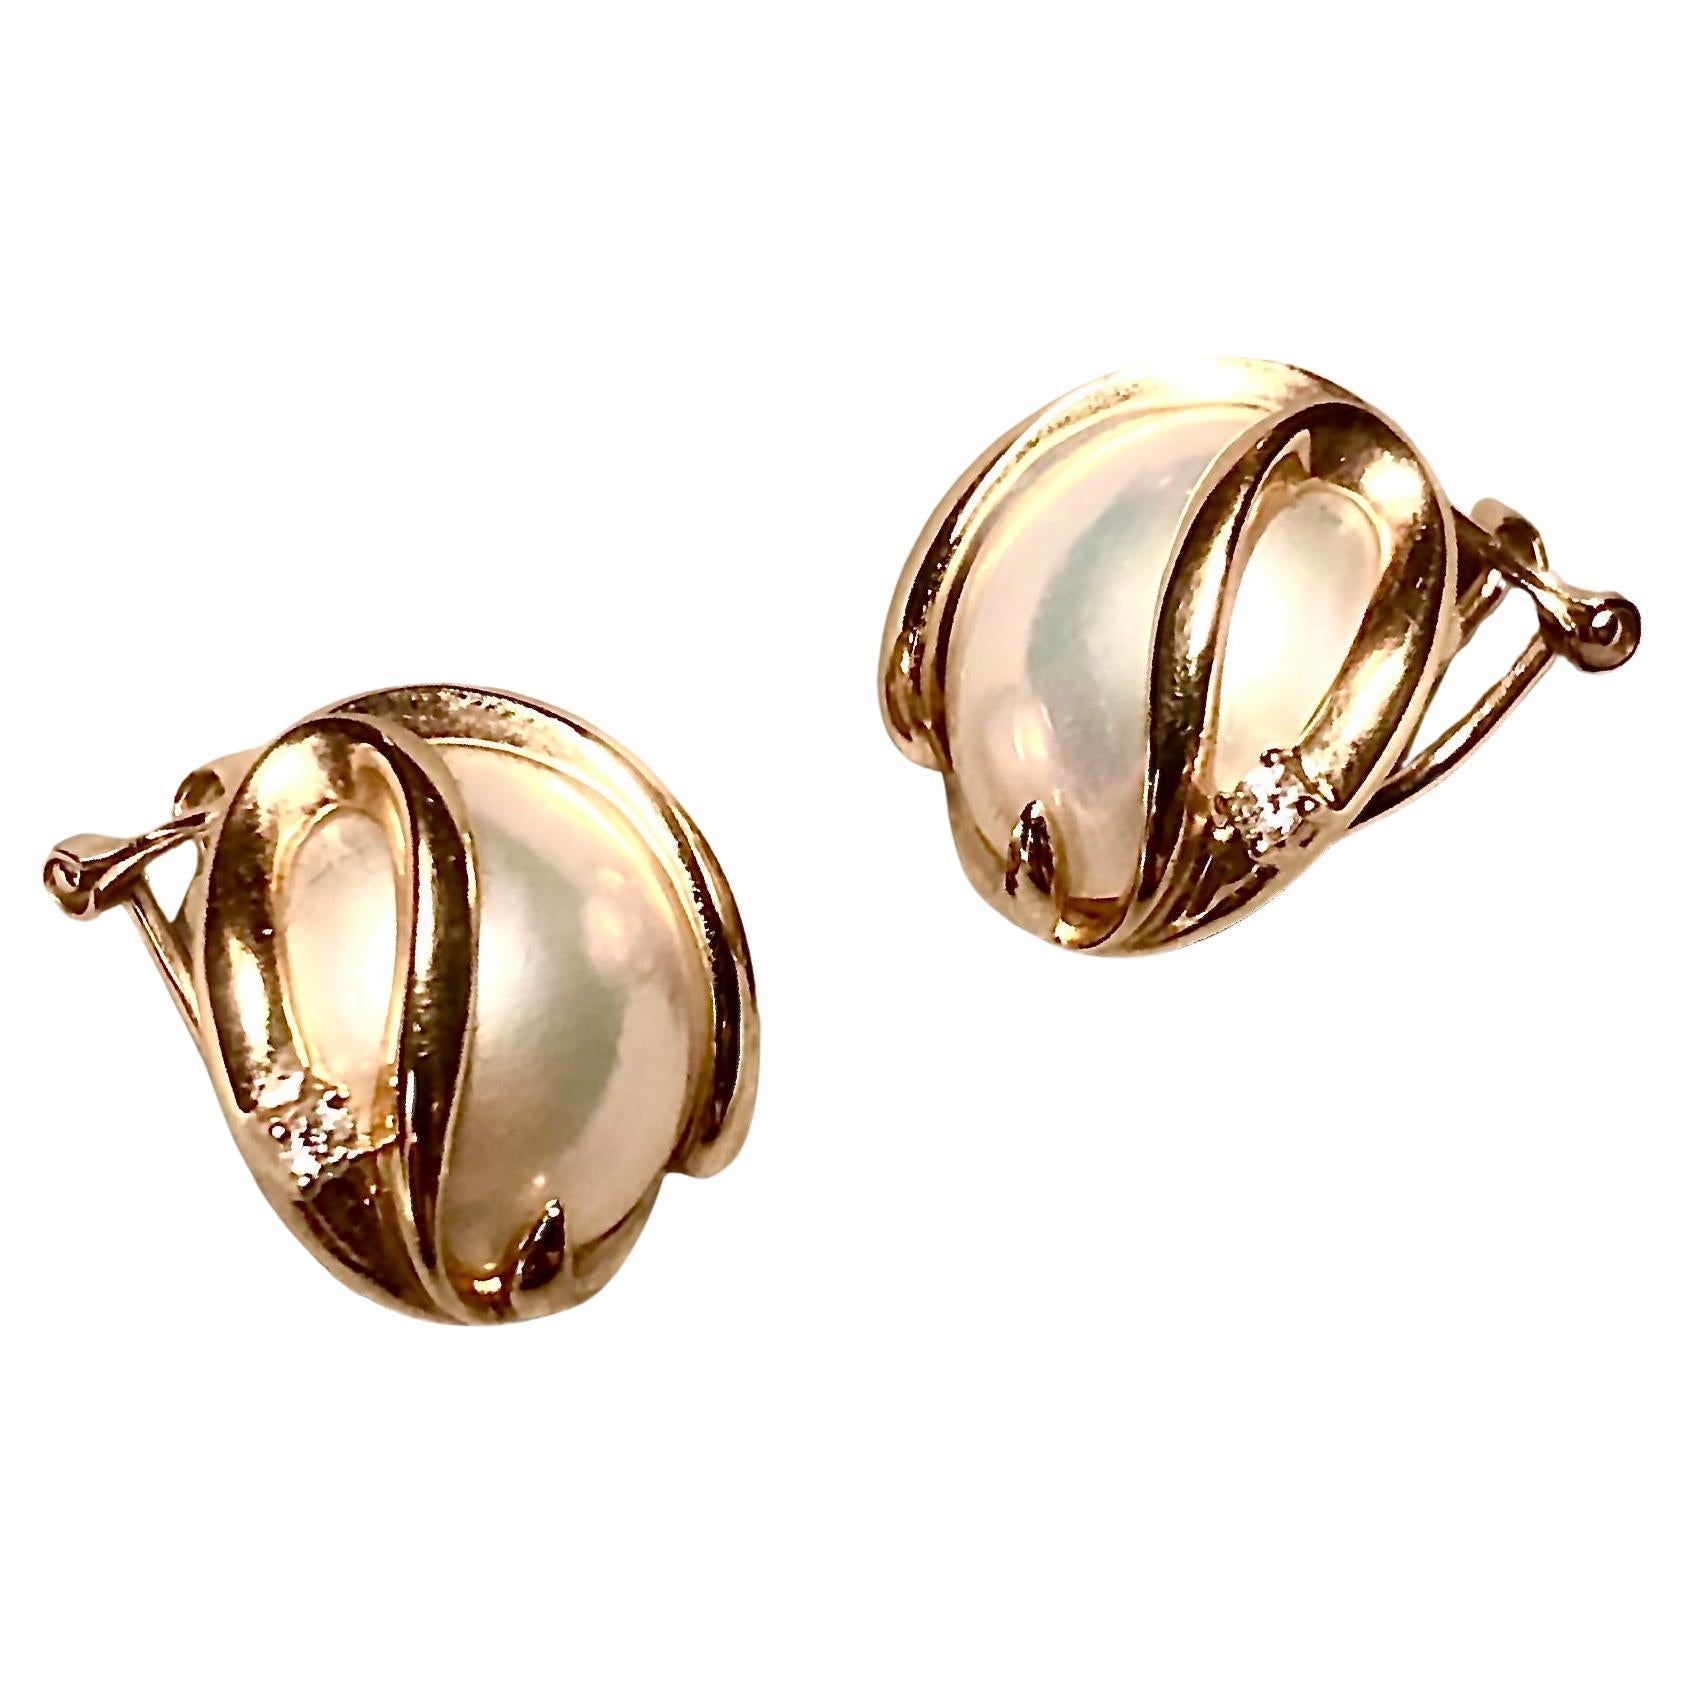 Cultured Mabe pearl, gold and diamond earrings